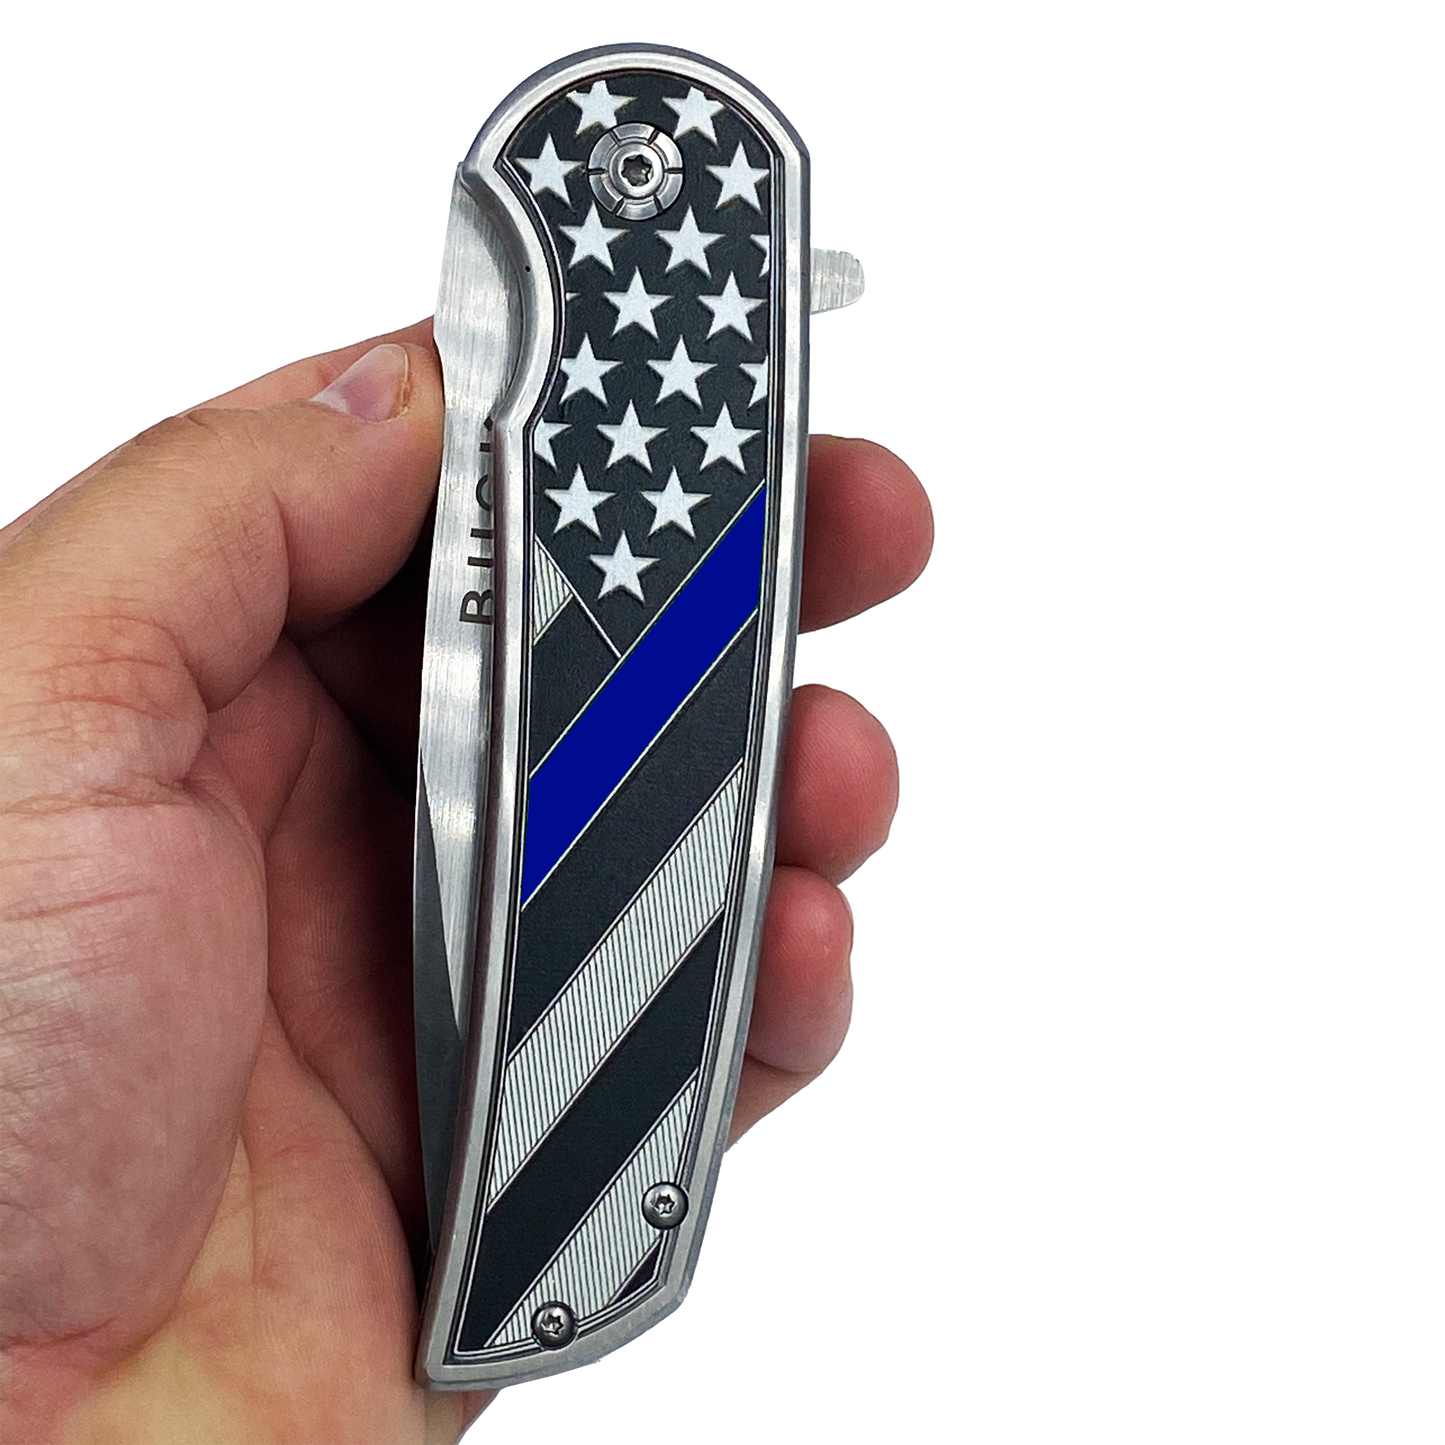 BL1-03 Thin Blue Line pocket tool Police Law Enforcement First Responder Rescue Tactical Survival